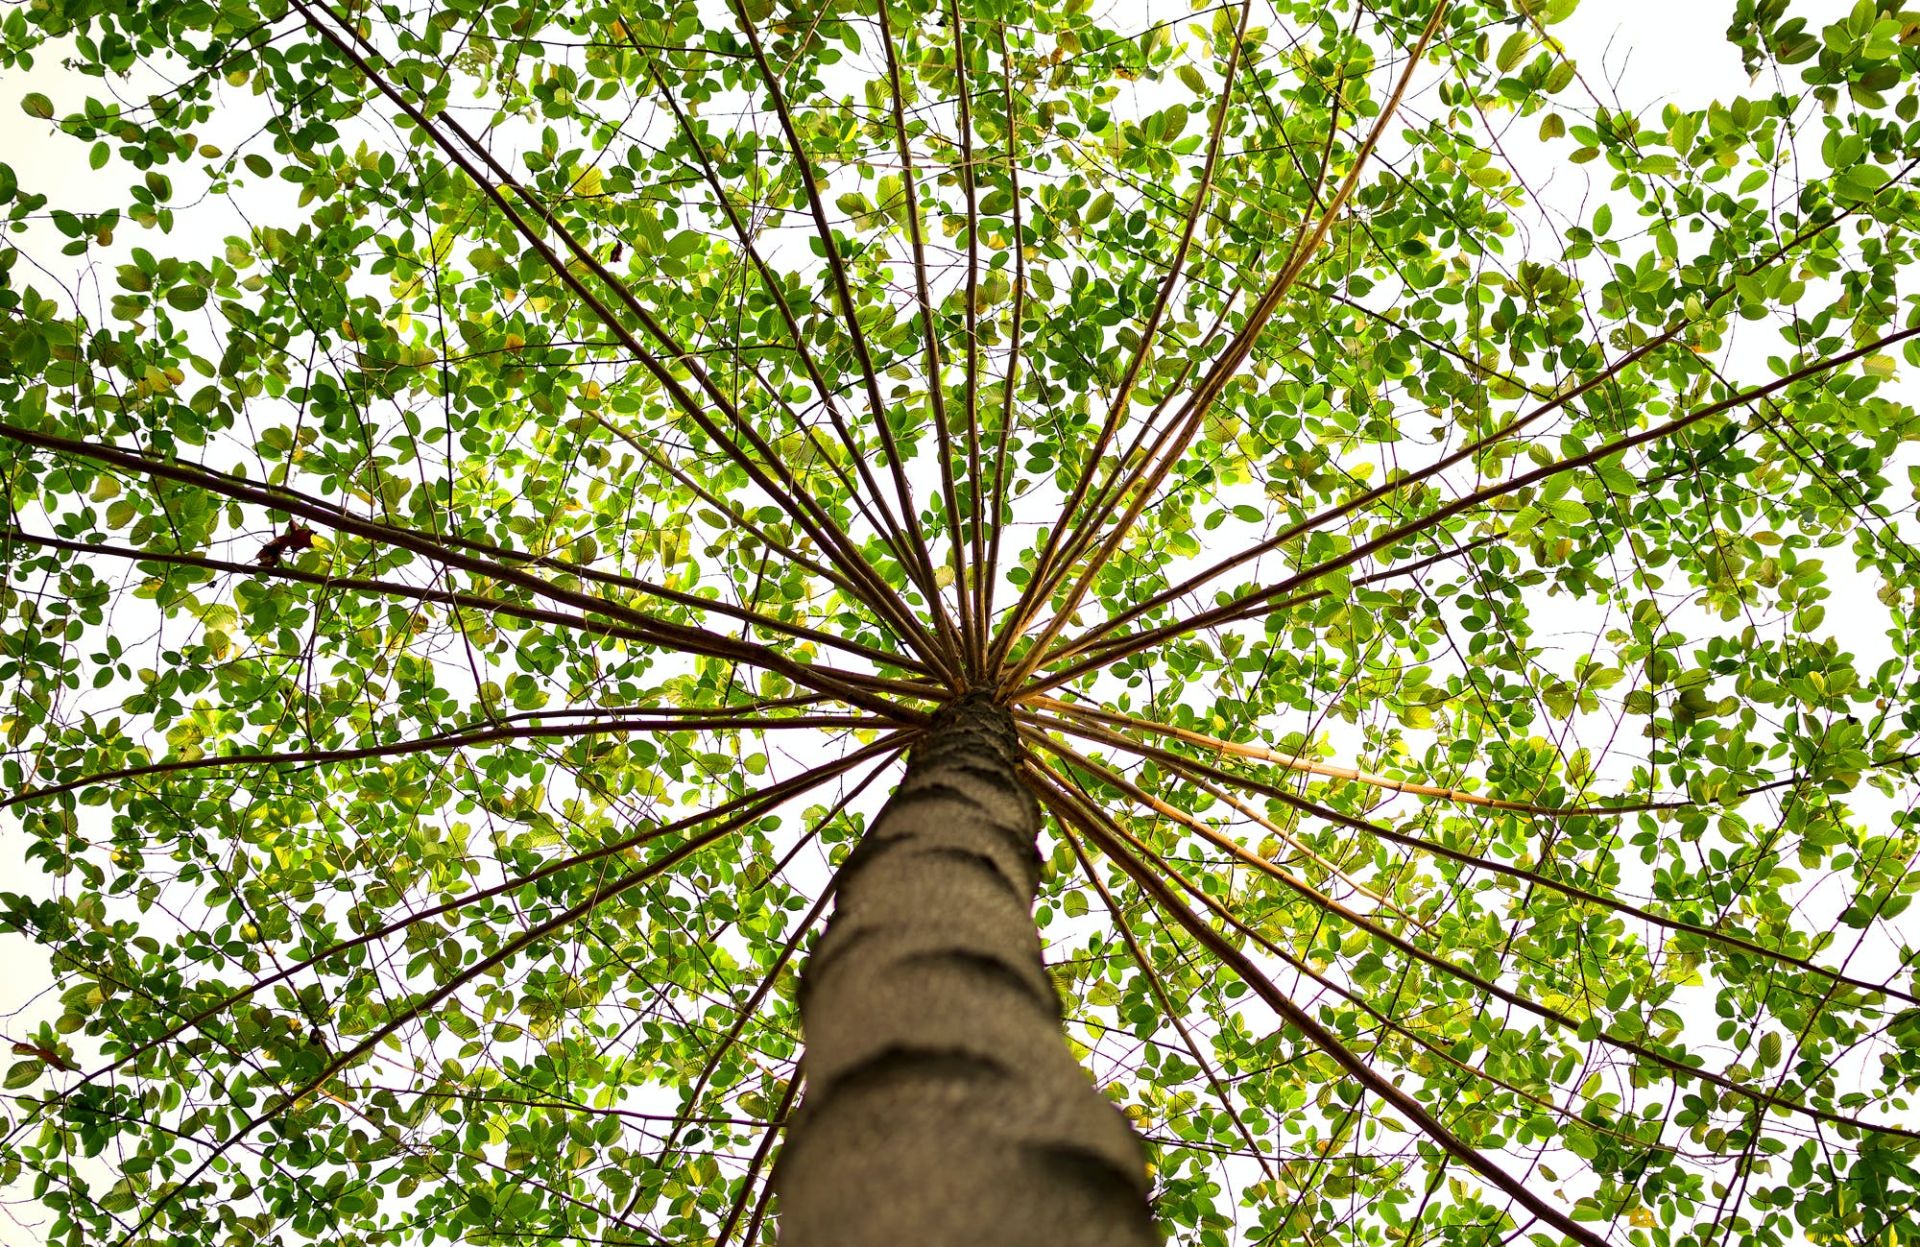 Bottom View of Green Leaved Tree during Daytime